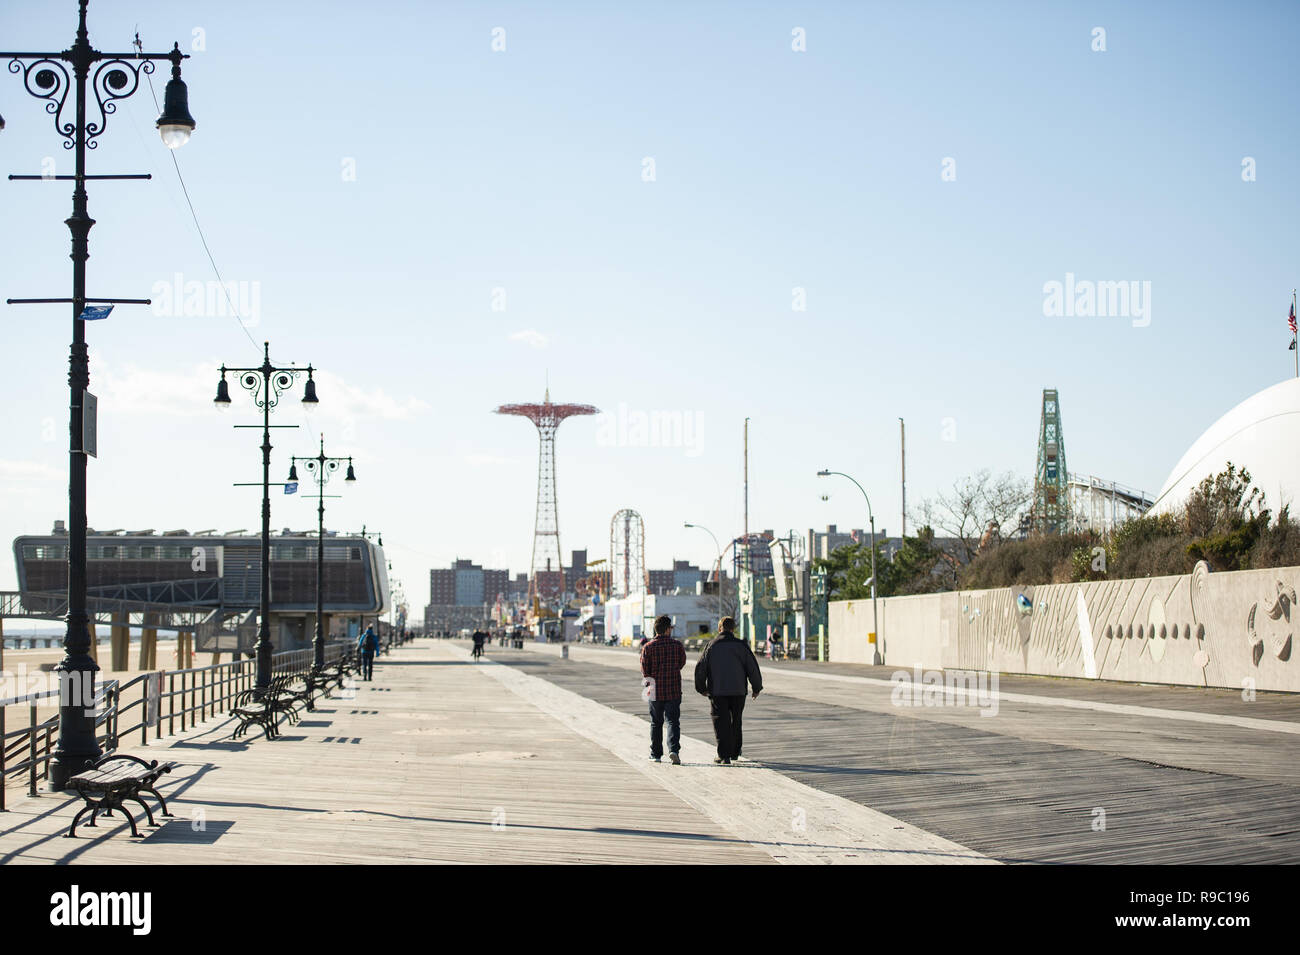 Some people are walking on the seafront of coney island. United States. Stock Photo